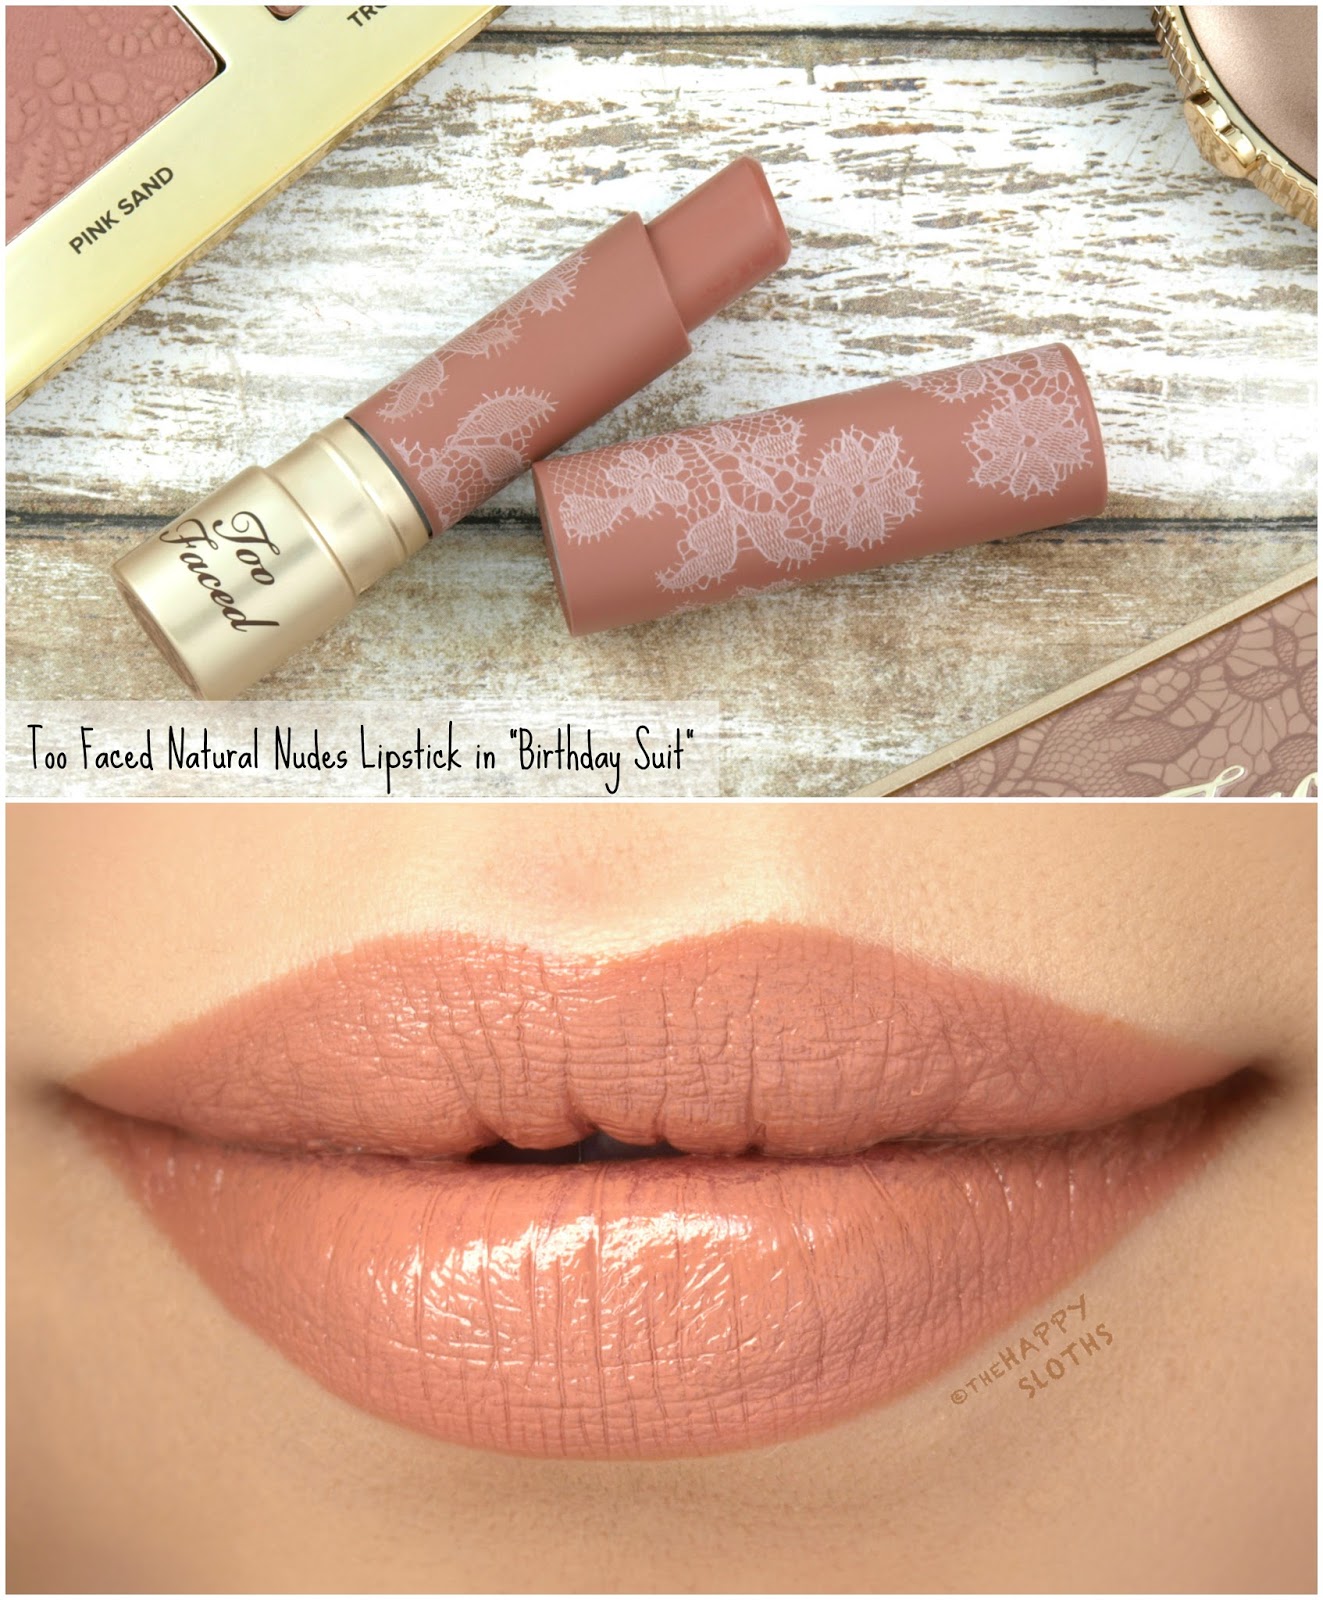 Too Faced | Natural Nudes Lipstick in "Birthday Suit": Review and Swatches